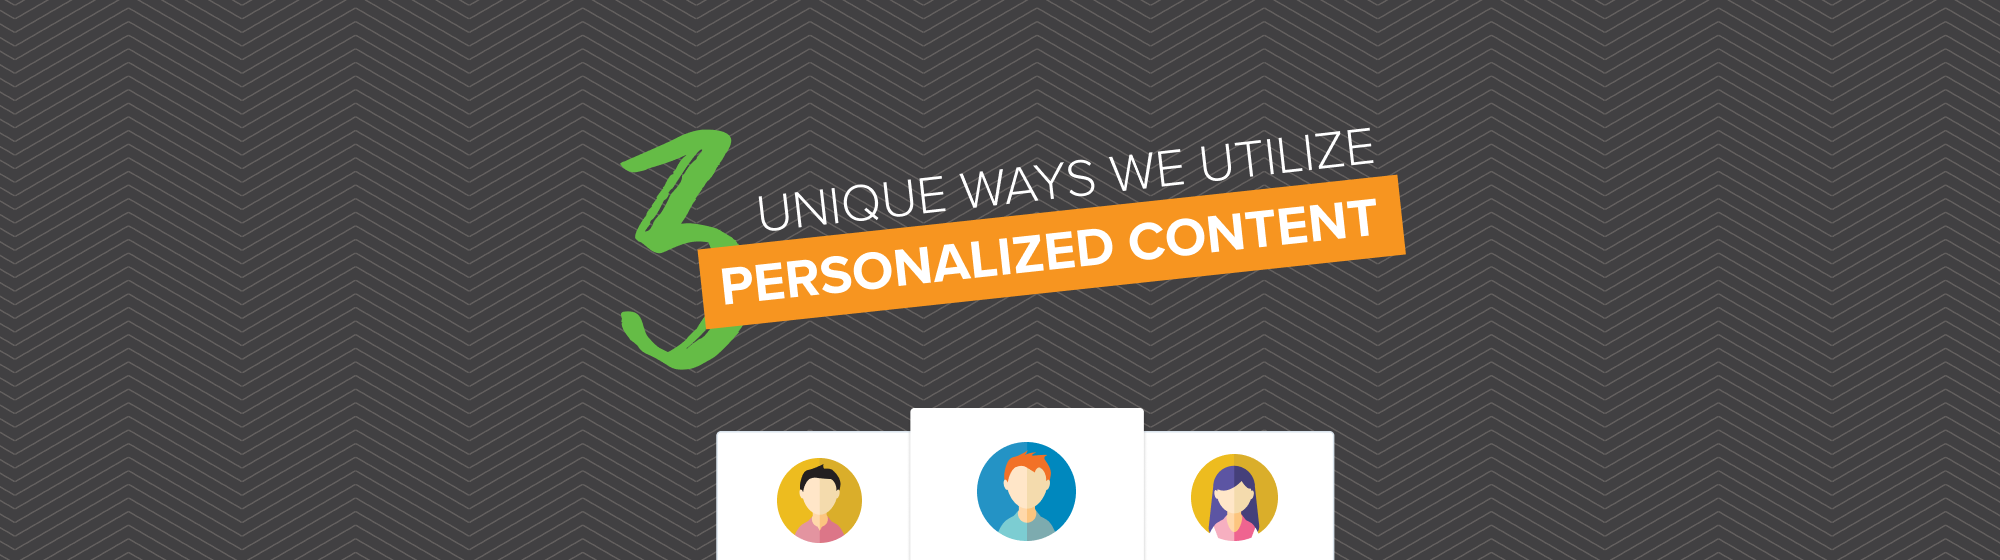 personalized content